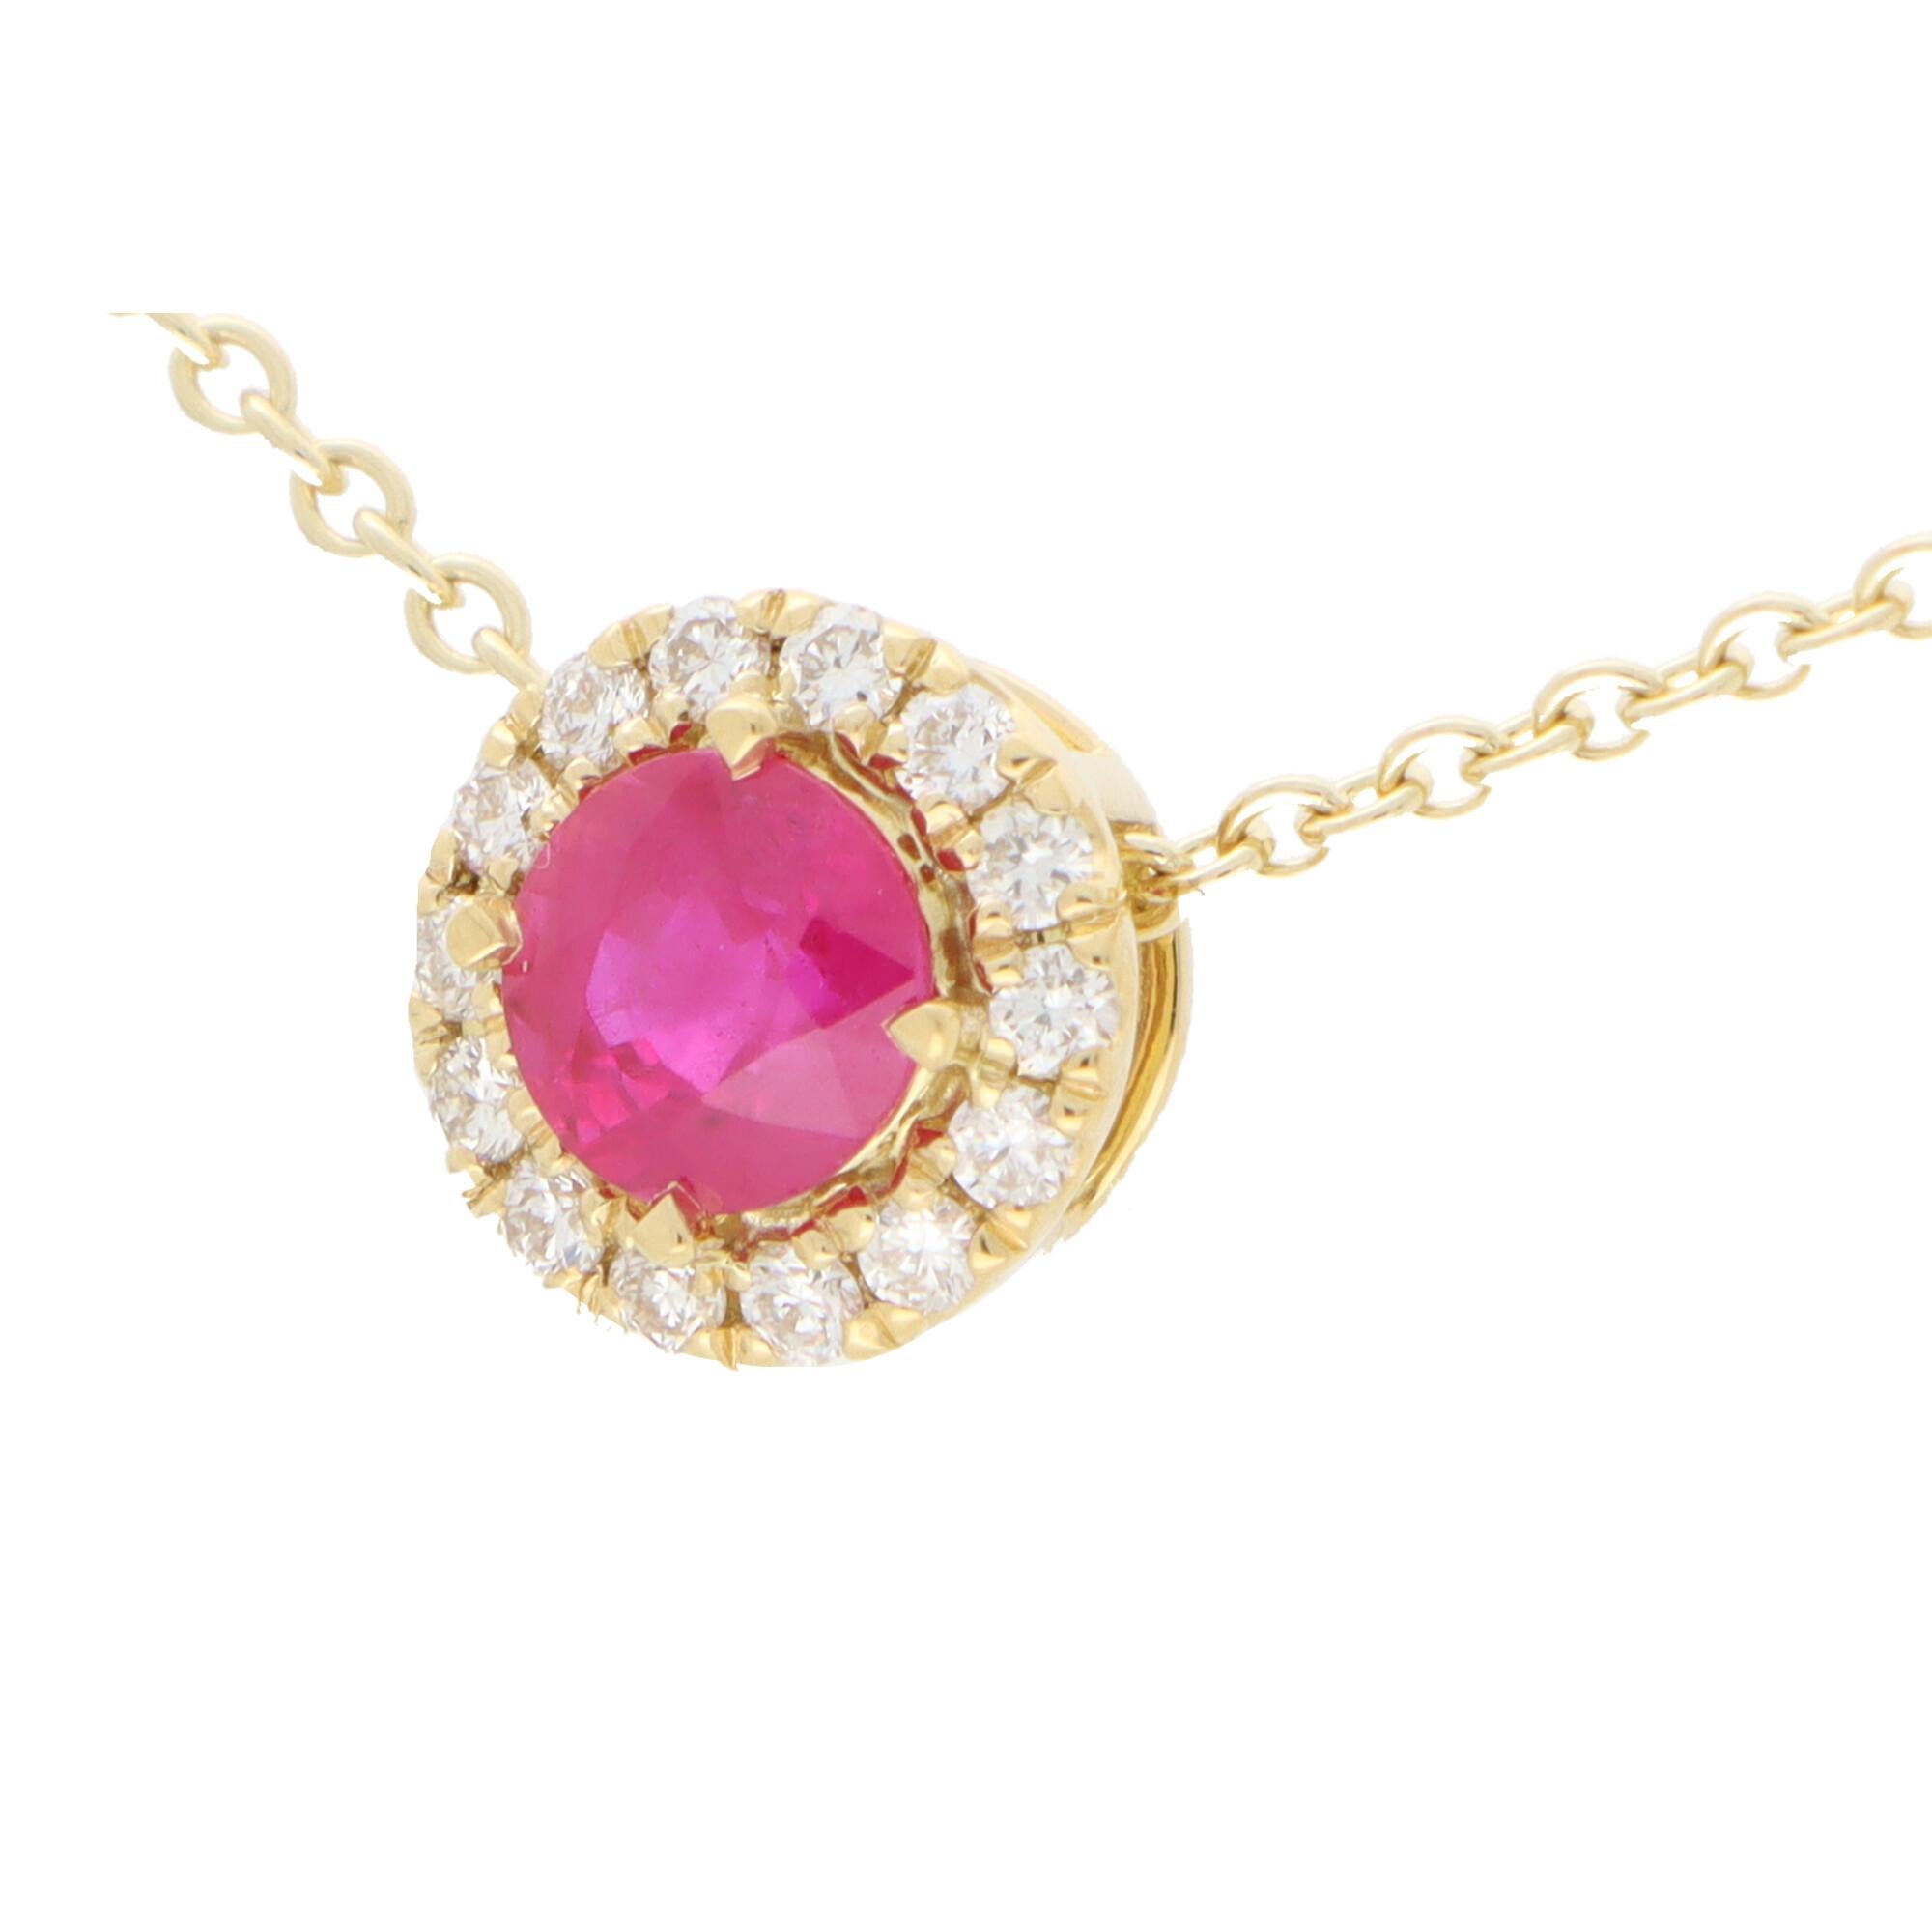 A beautiful ruby and diamond cluster pendant set in 18k yellow gold.

The pendant is centrally set with a vibrant pinkish-red coloured round cut ruby which is surrounded by 14 sparkly round brilliant cut diamonds. The pendant hangs from a 9k yellow